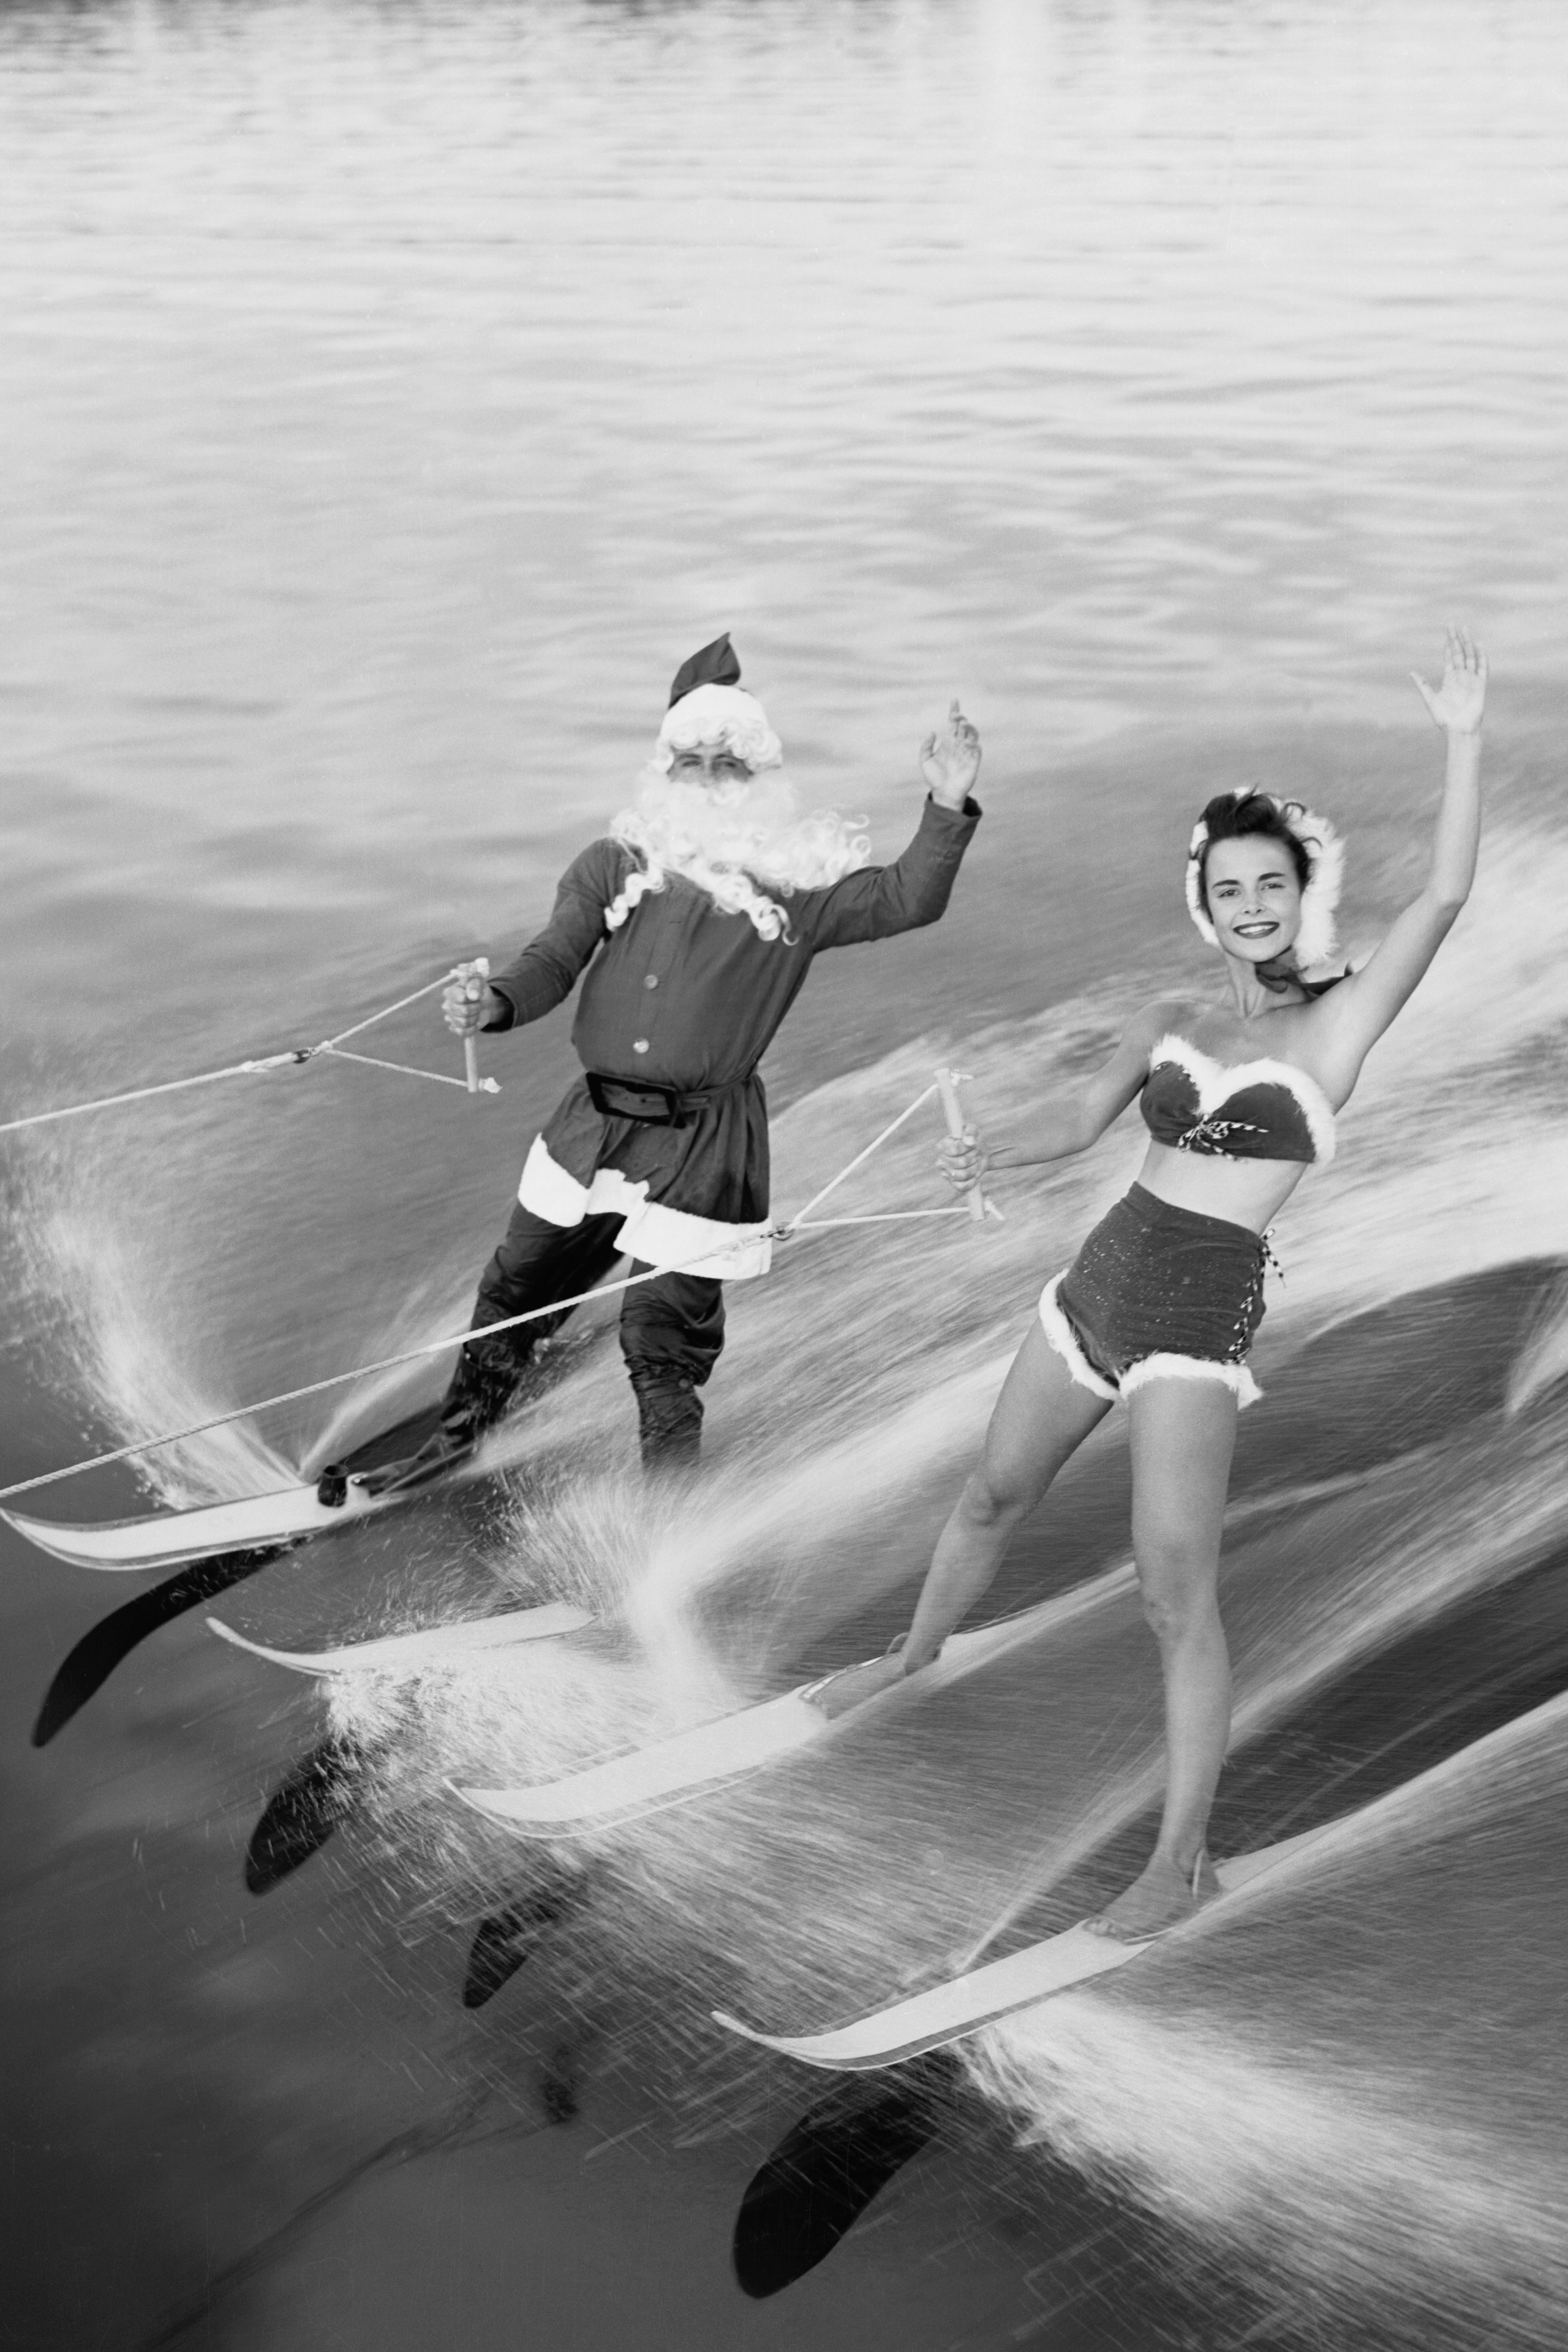 This Santa Claus helper has left Rudolph the RedNosed Reindeer and his sleigh up north and has taken to water skiing at...